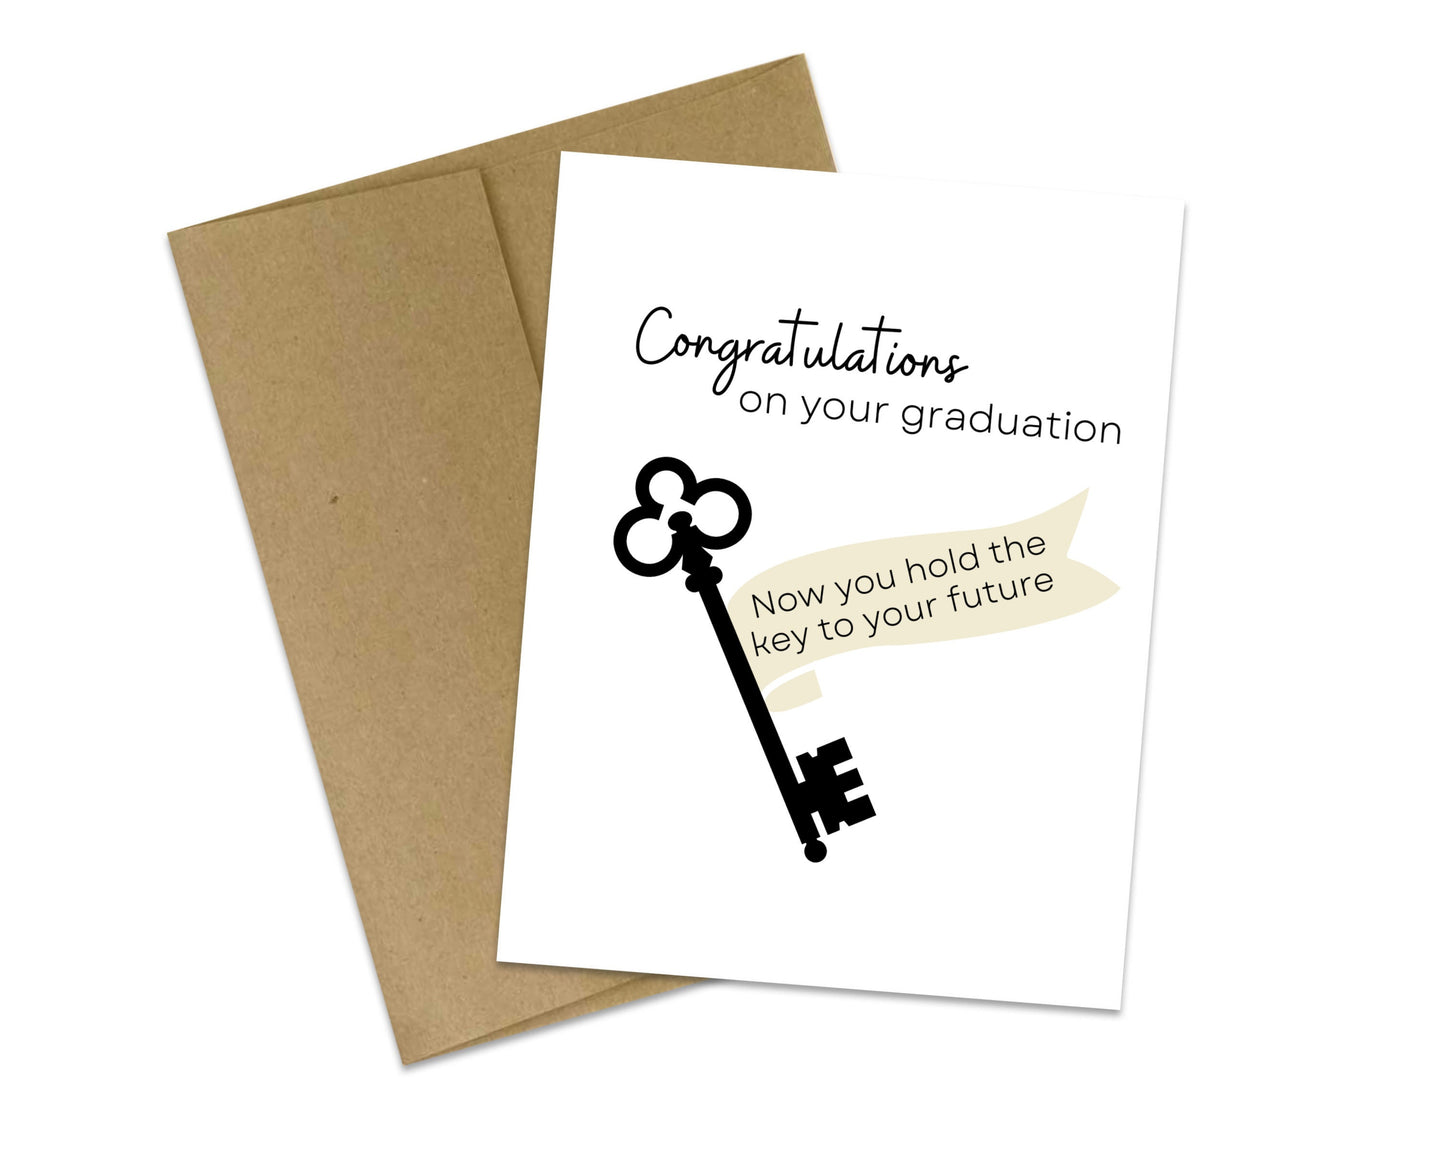 Congratulations on your graduation (now you hold the key to your future)